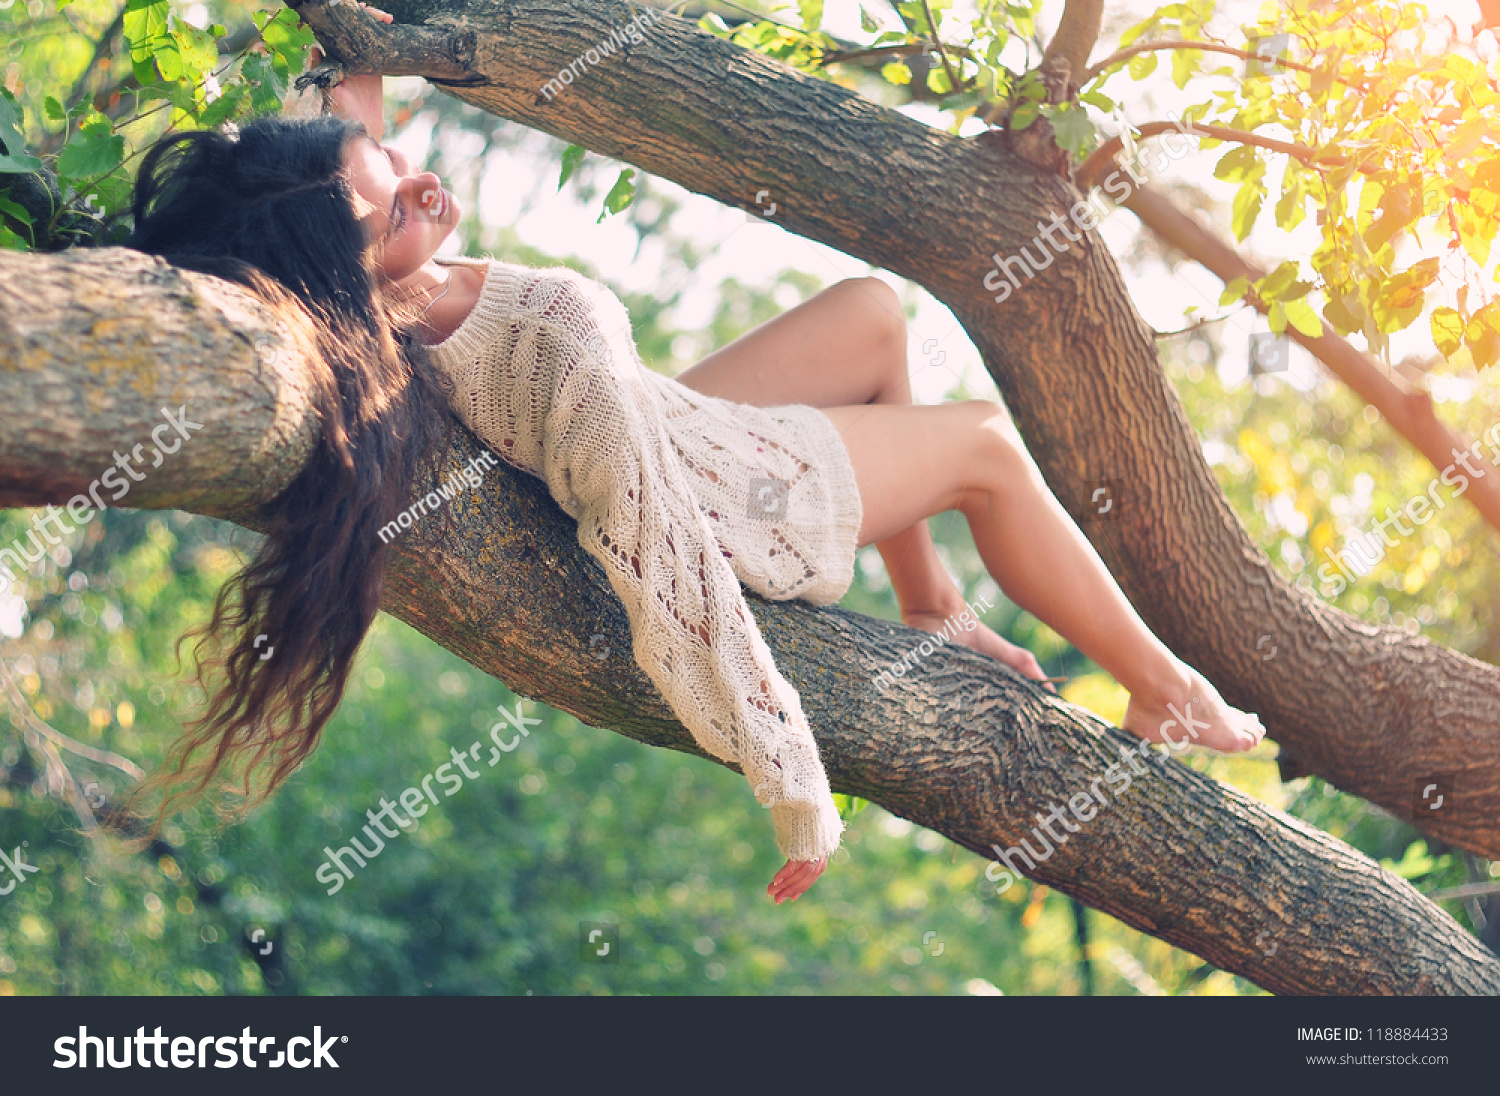 https://image.shutterstock.com/shutterstock/photos/118884433/display_1500/stock-photo-young-caucasian-girl-lying-on-the-branch-of-the-tree-outdoors-at-green-nature-background-118884433.jpg